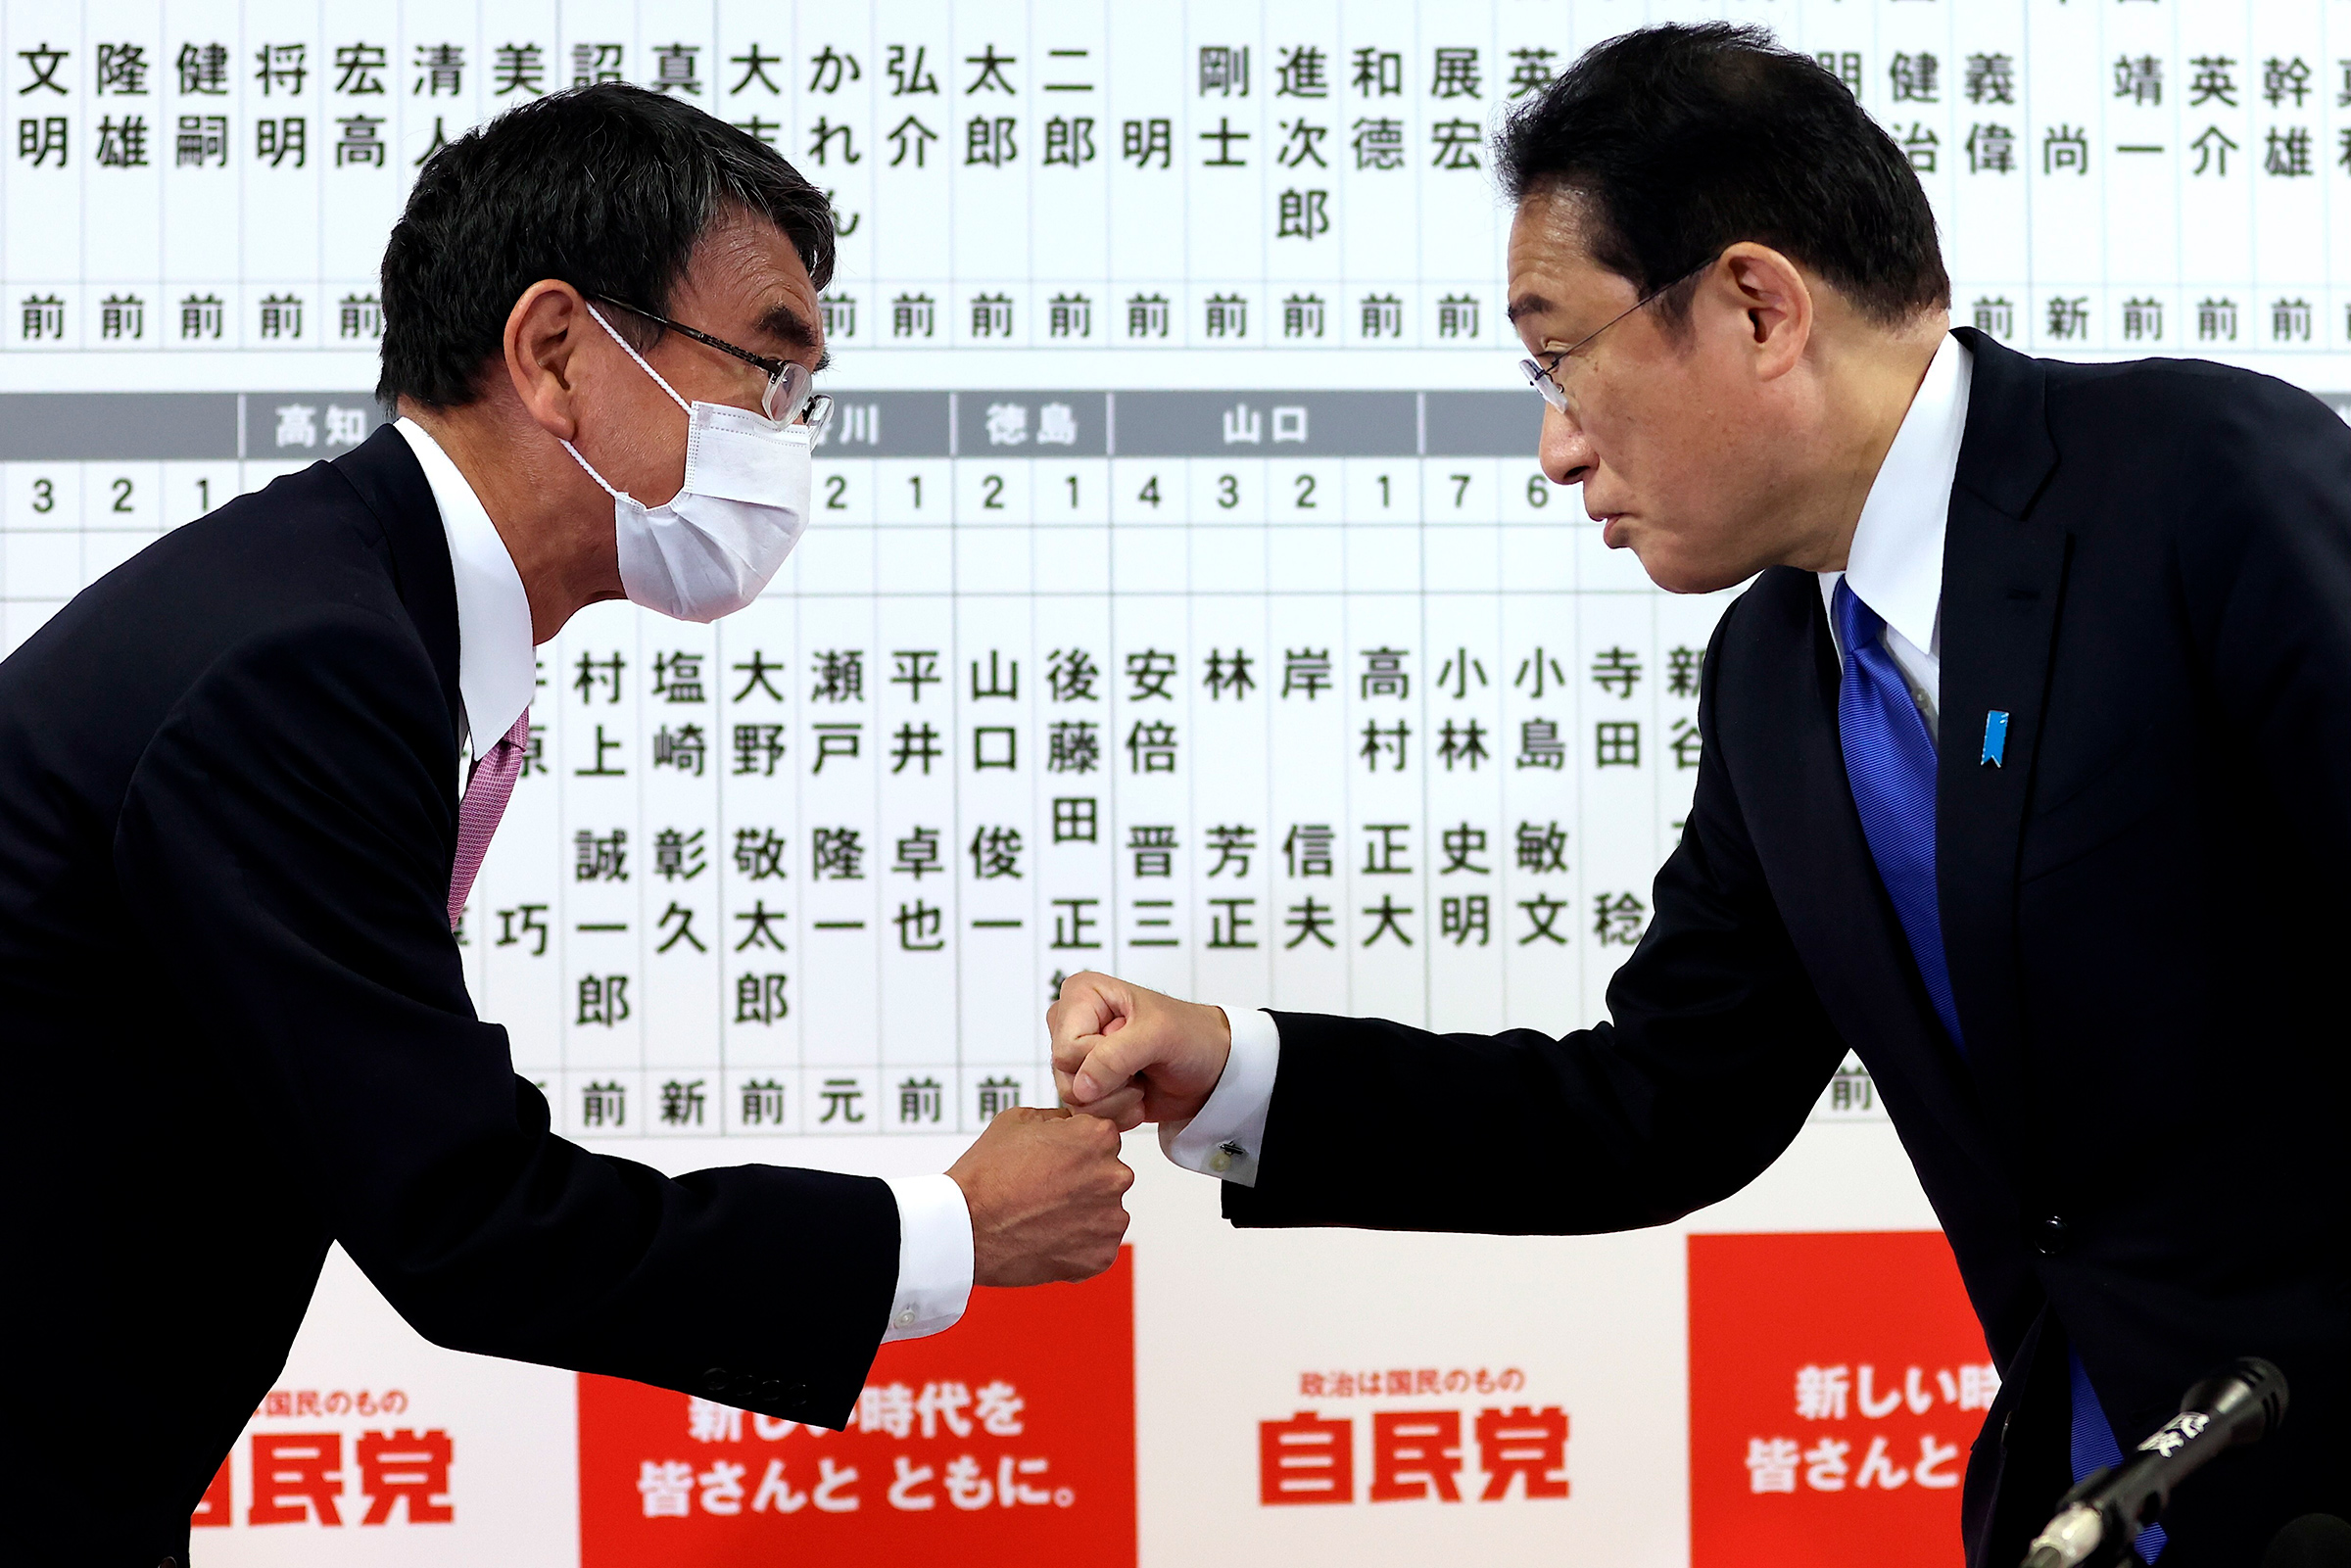 Japan Prime Minister Fumio Kishida, right, fist bumps with Kono at the Liberal Democratic Party party headquarters in Tokyo, Oct. 31, 2021. (Behrouz Mehri—Pool/AP)